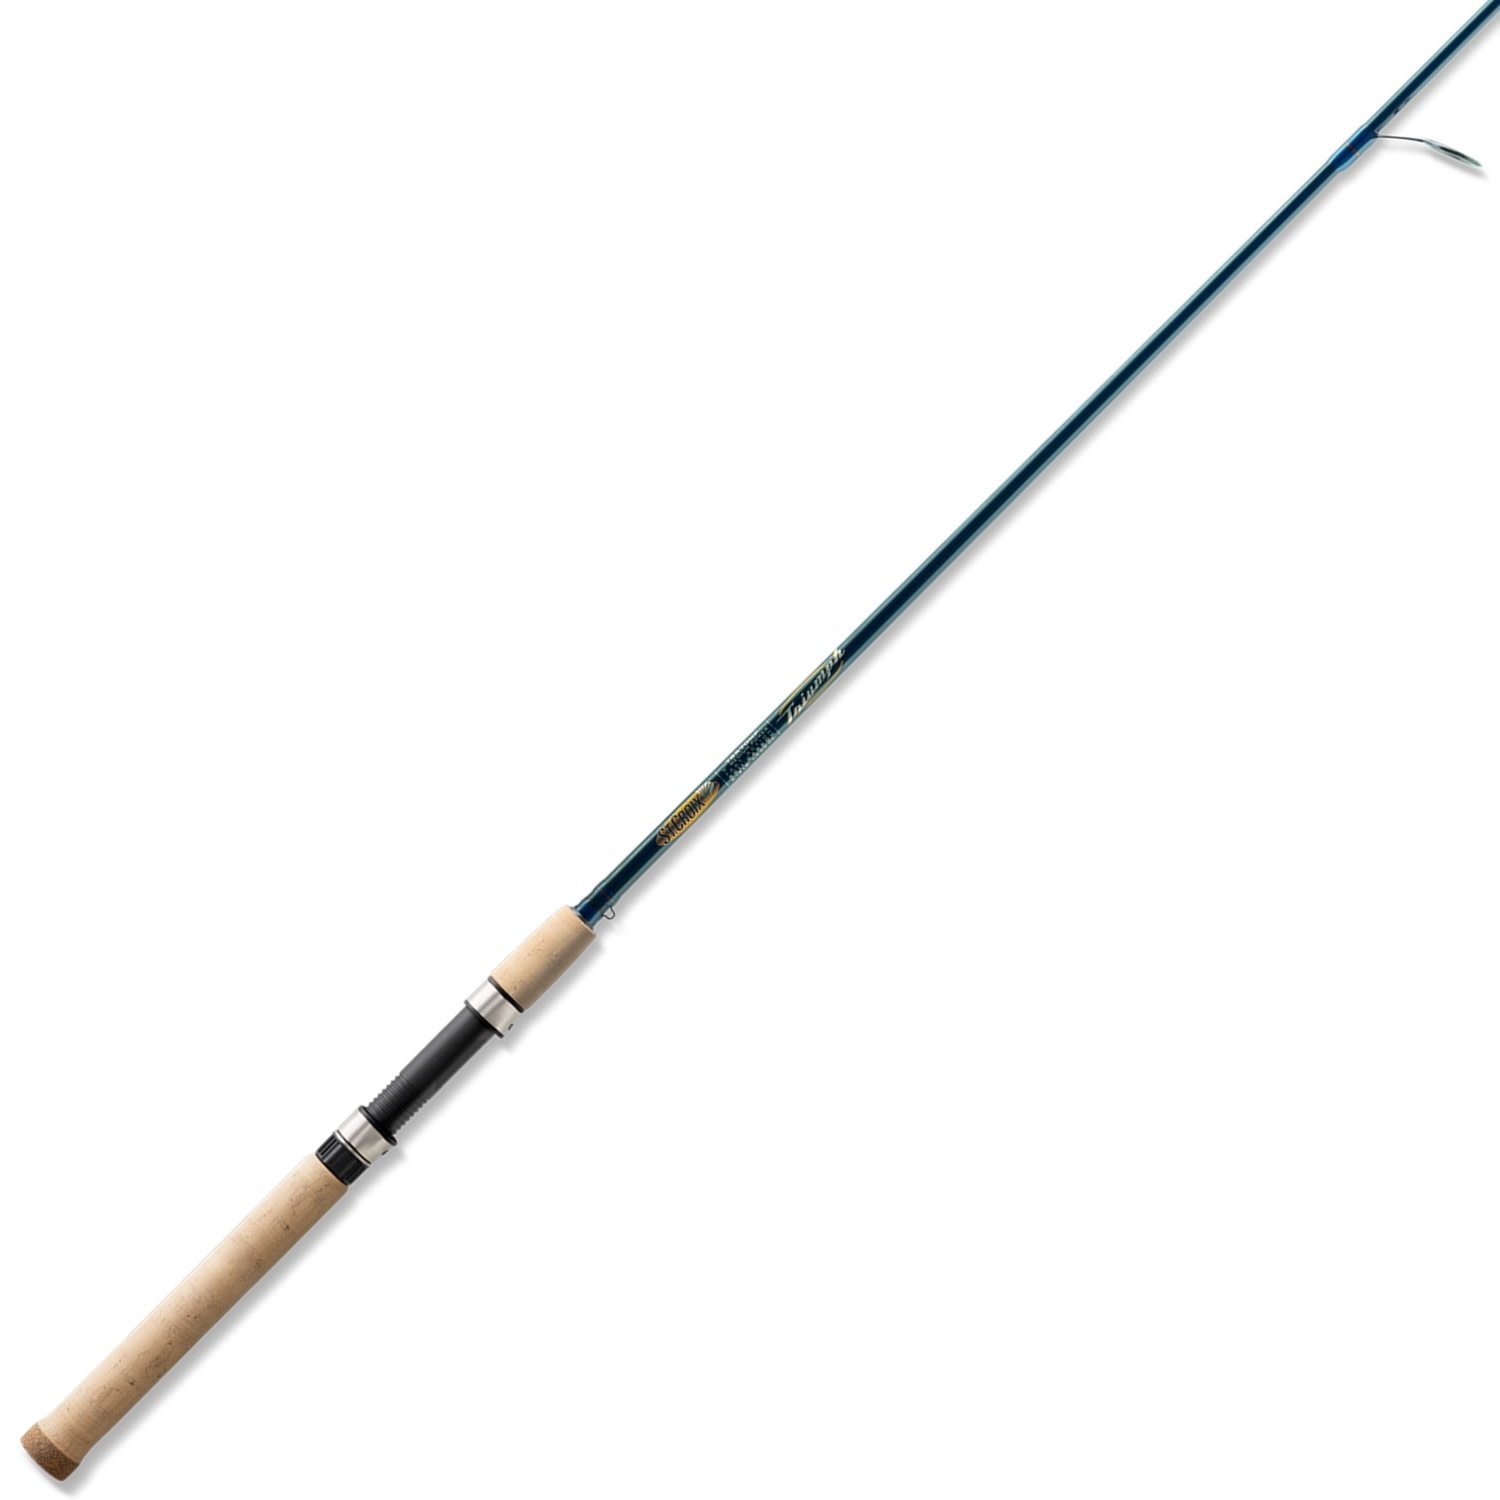 ST CROIX TRIUMPH® SPINNING RODS